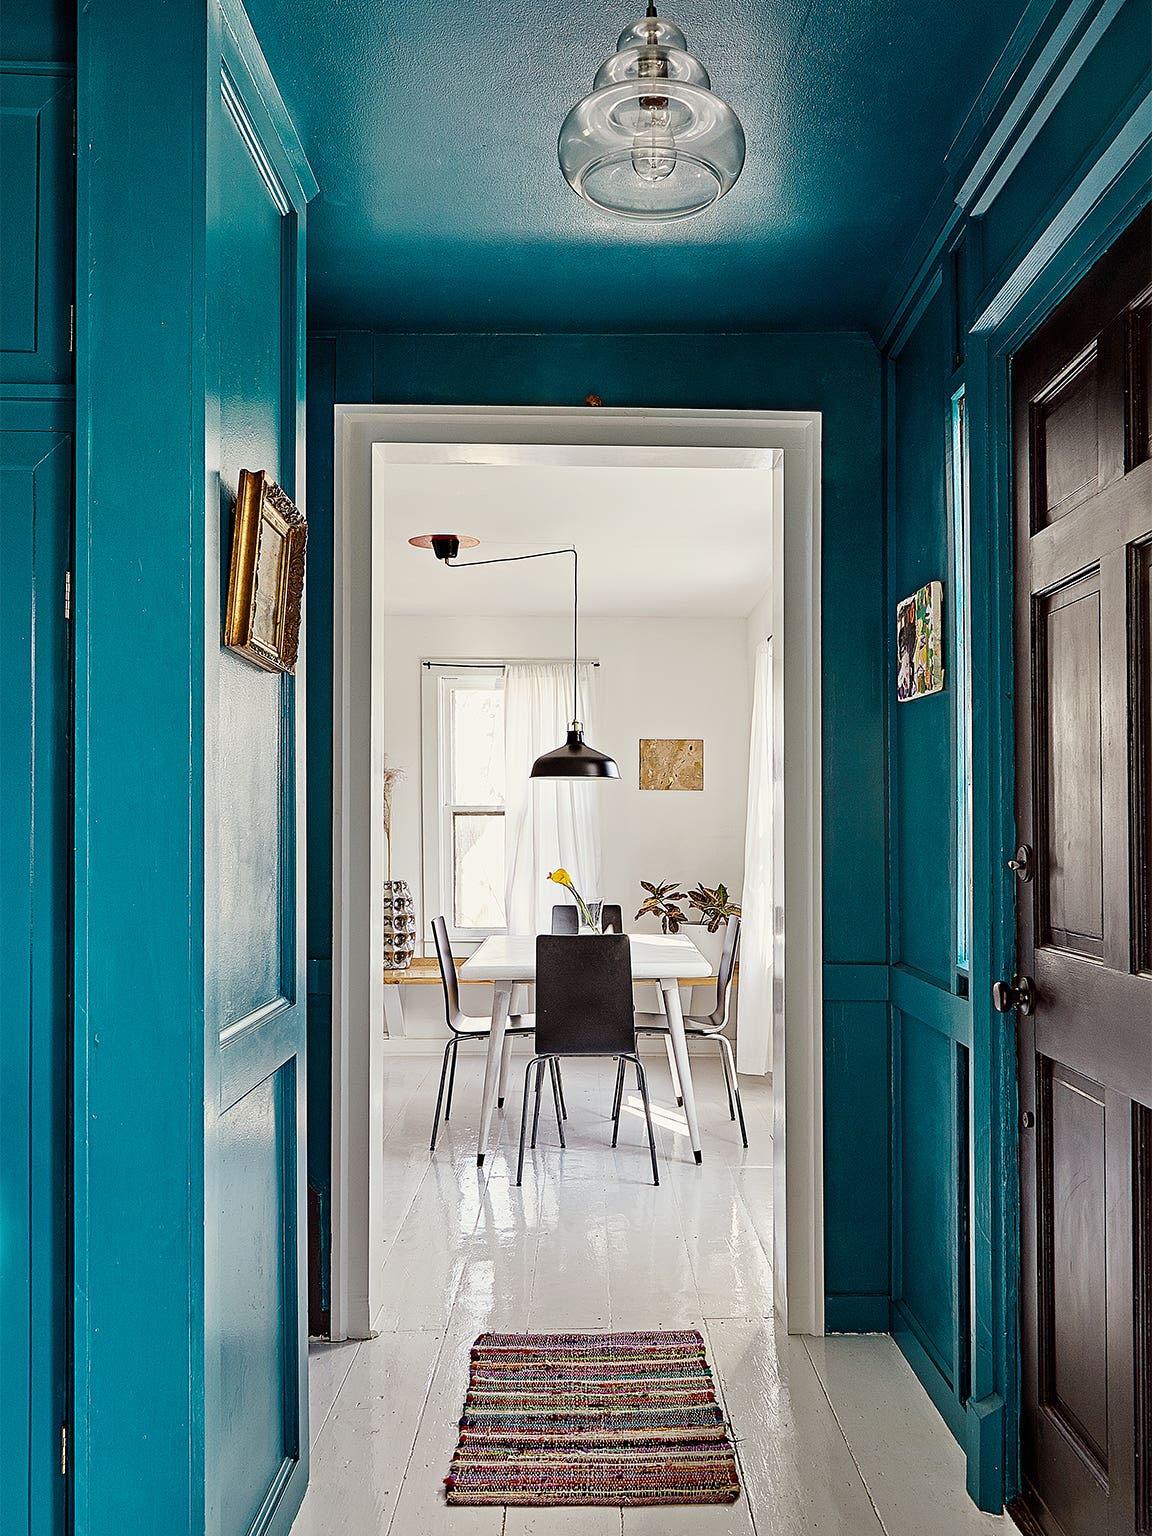 Hallways Are Tough to Decorate—That’s Where These Ideas Come In